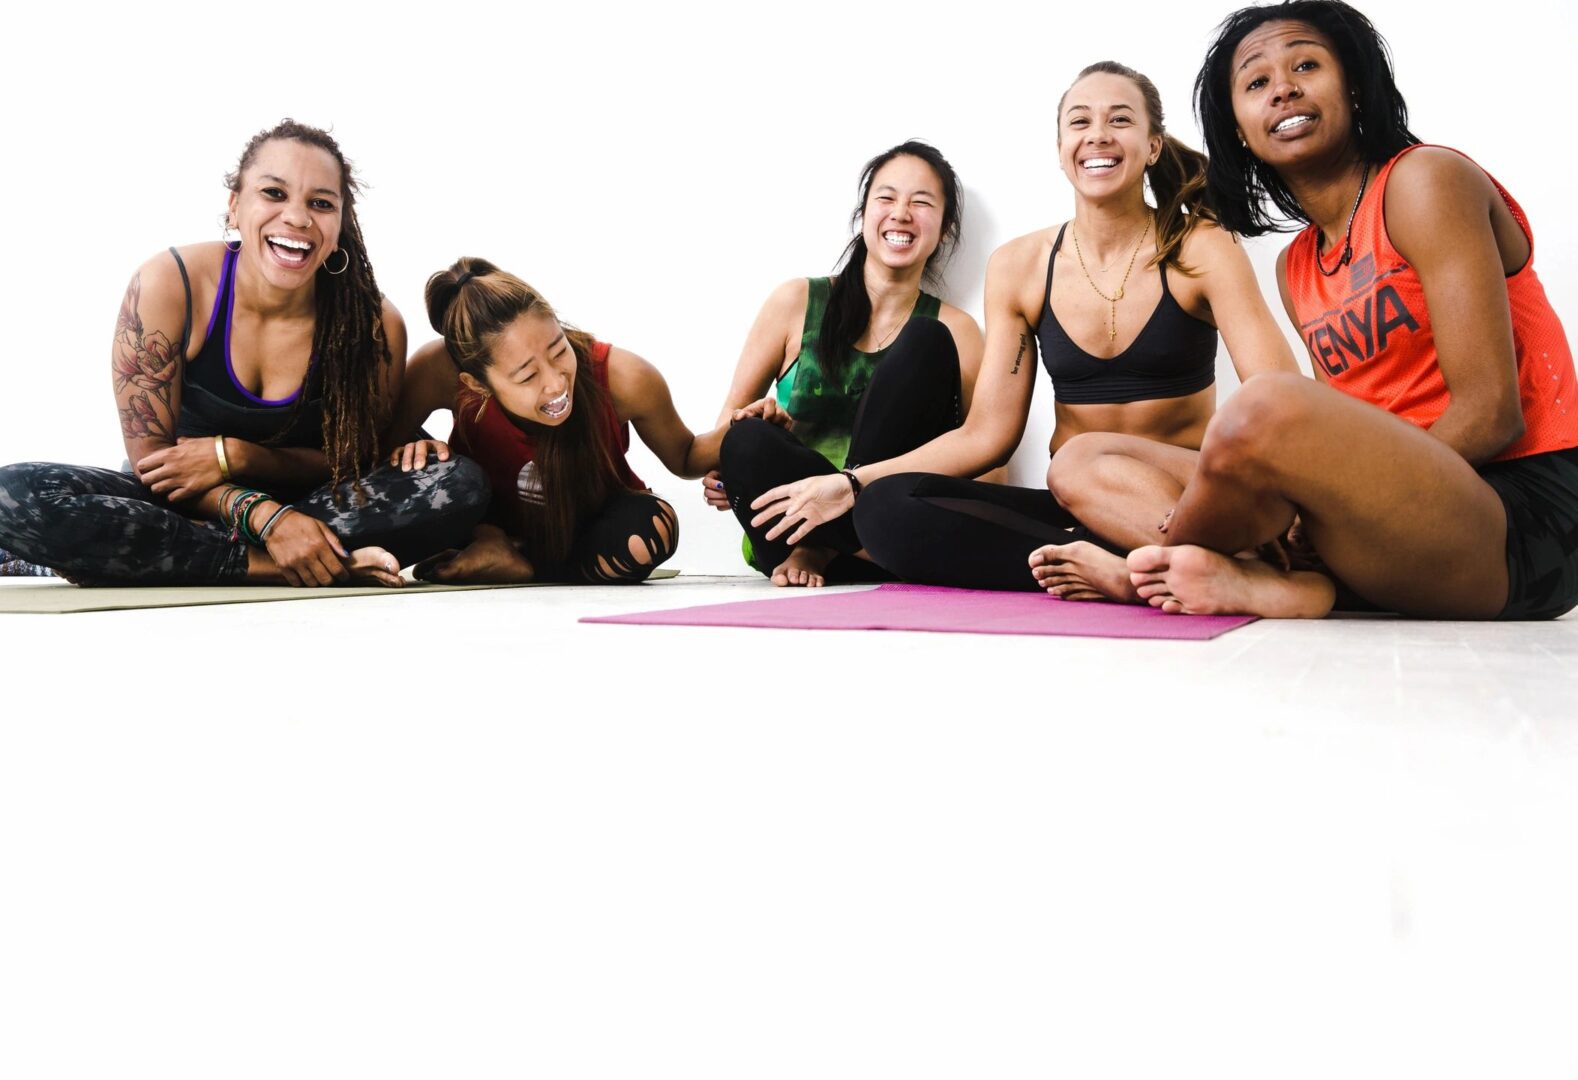 A group of women sitting on the ground in yoga poses.